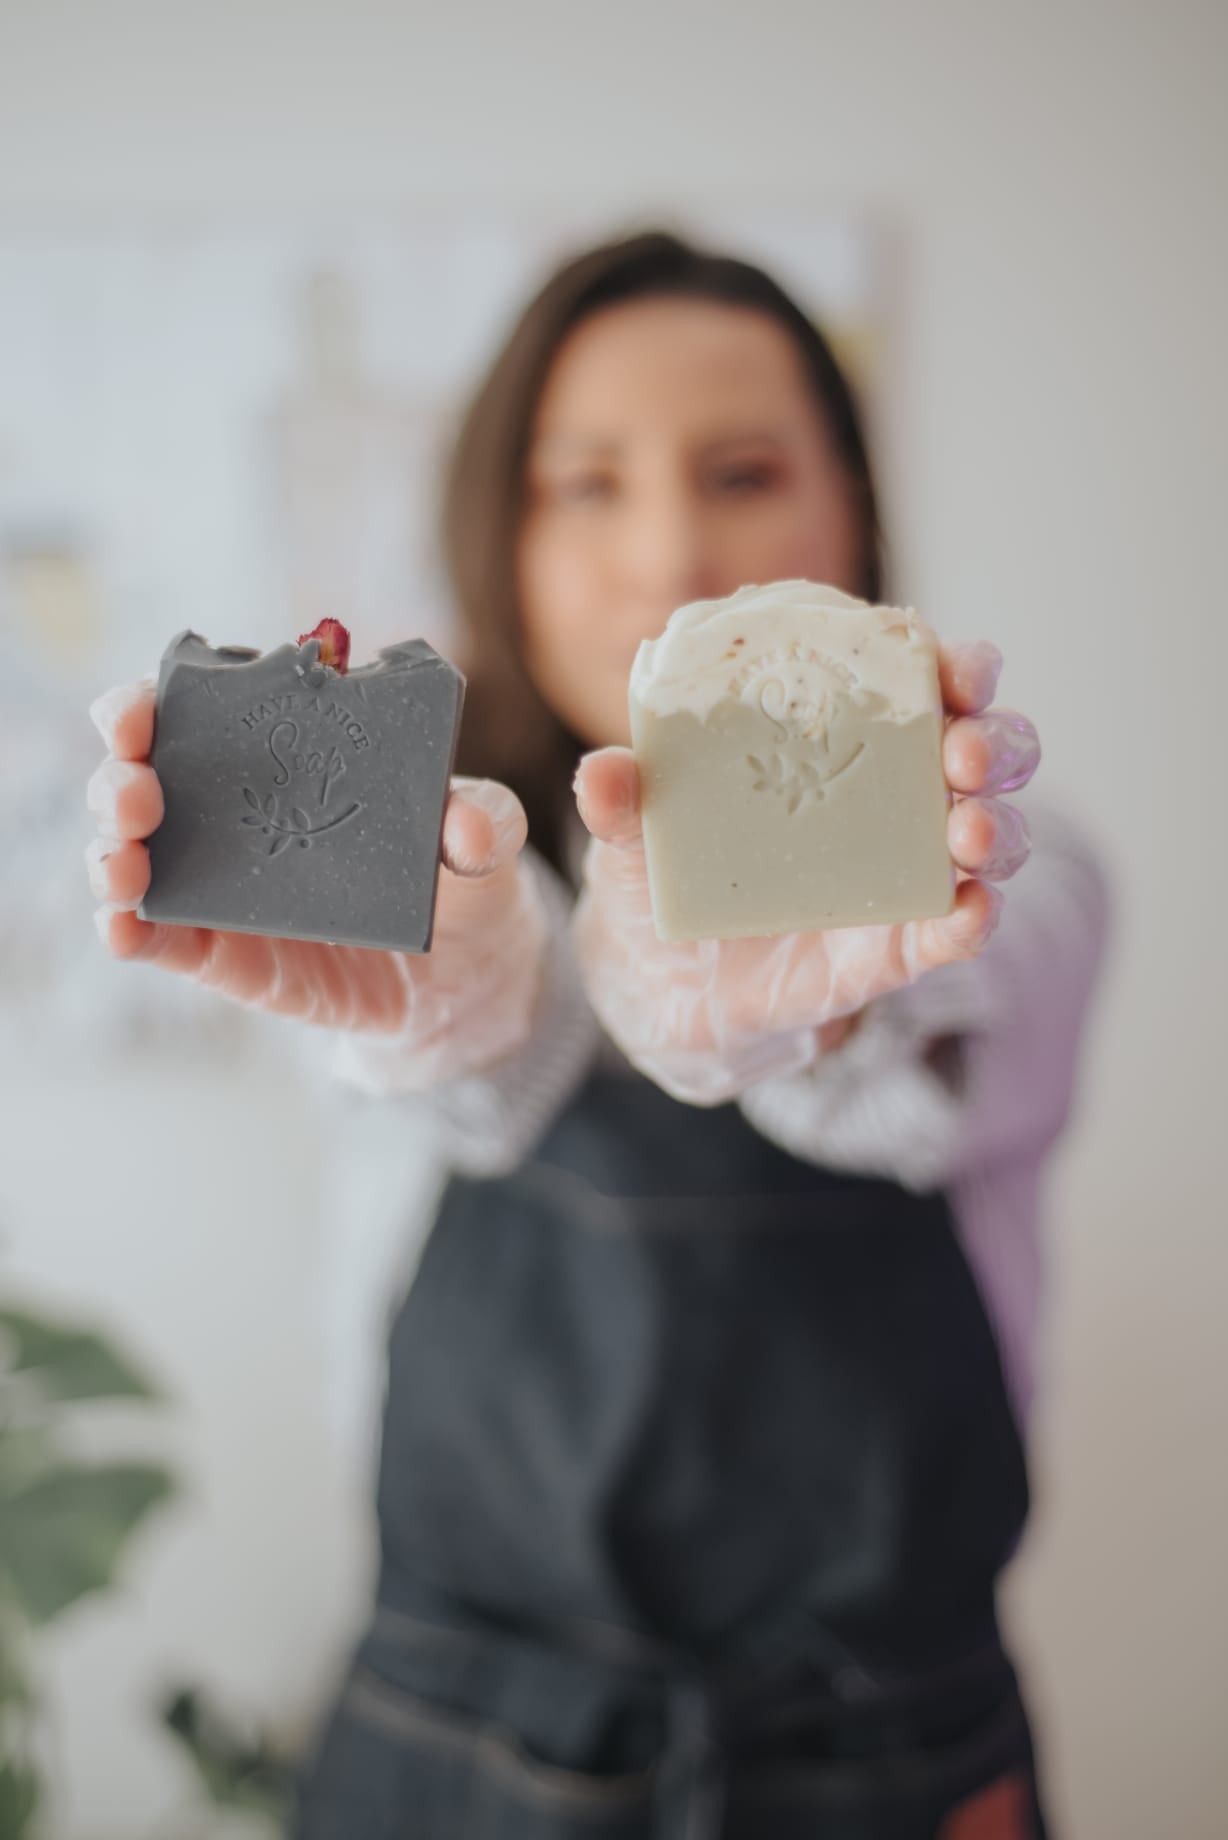 Sustainable Irish Brand called Have A Nice Soap. Founder Christiane Chiodi holds up two natural soap bars she made in Ireland